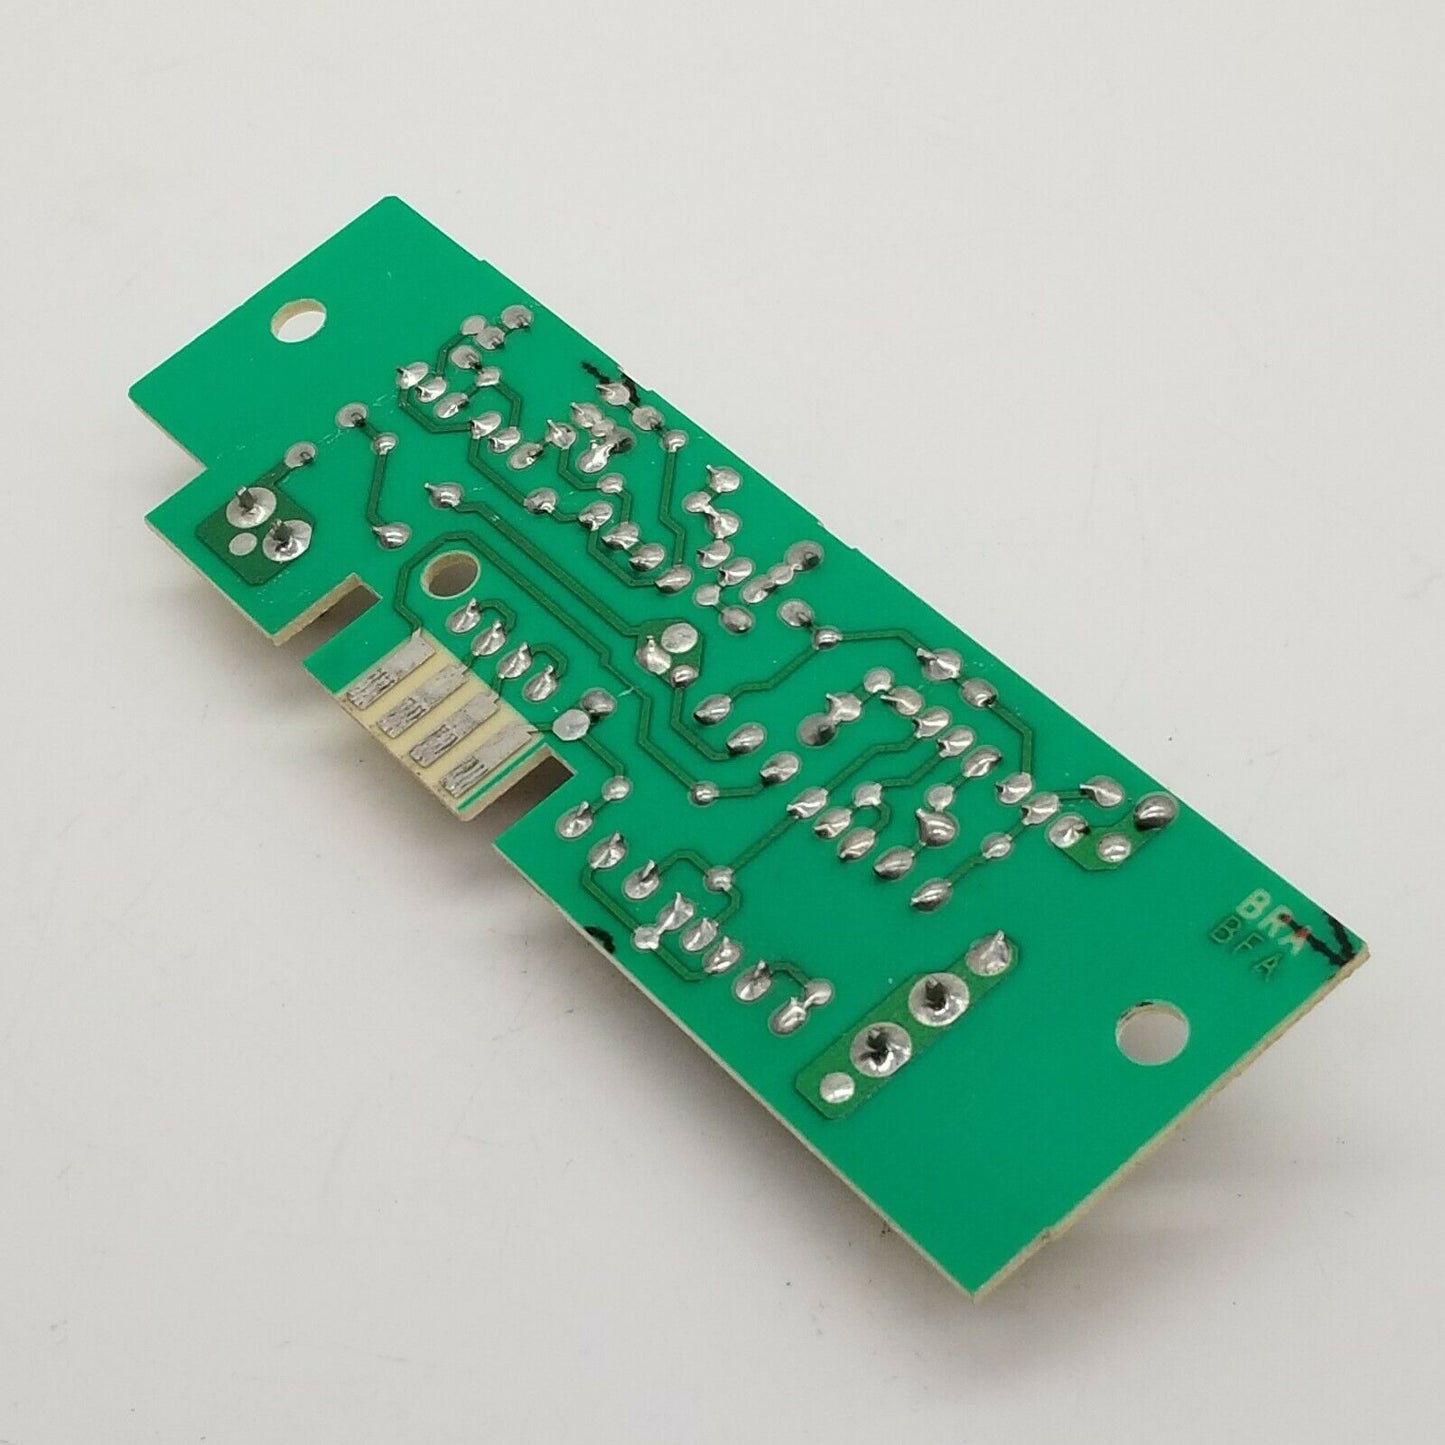 OEM Replacement for Maytag Dryer Control Board 63708950